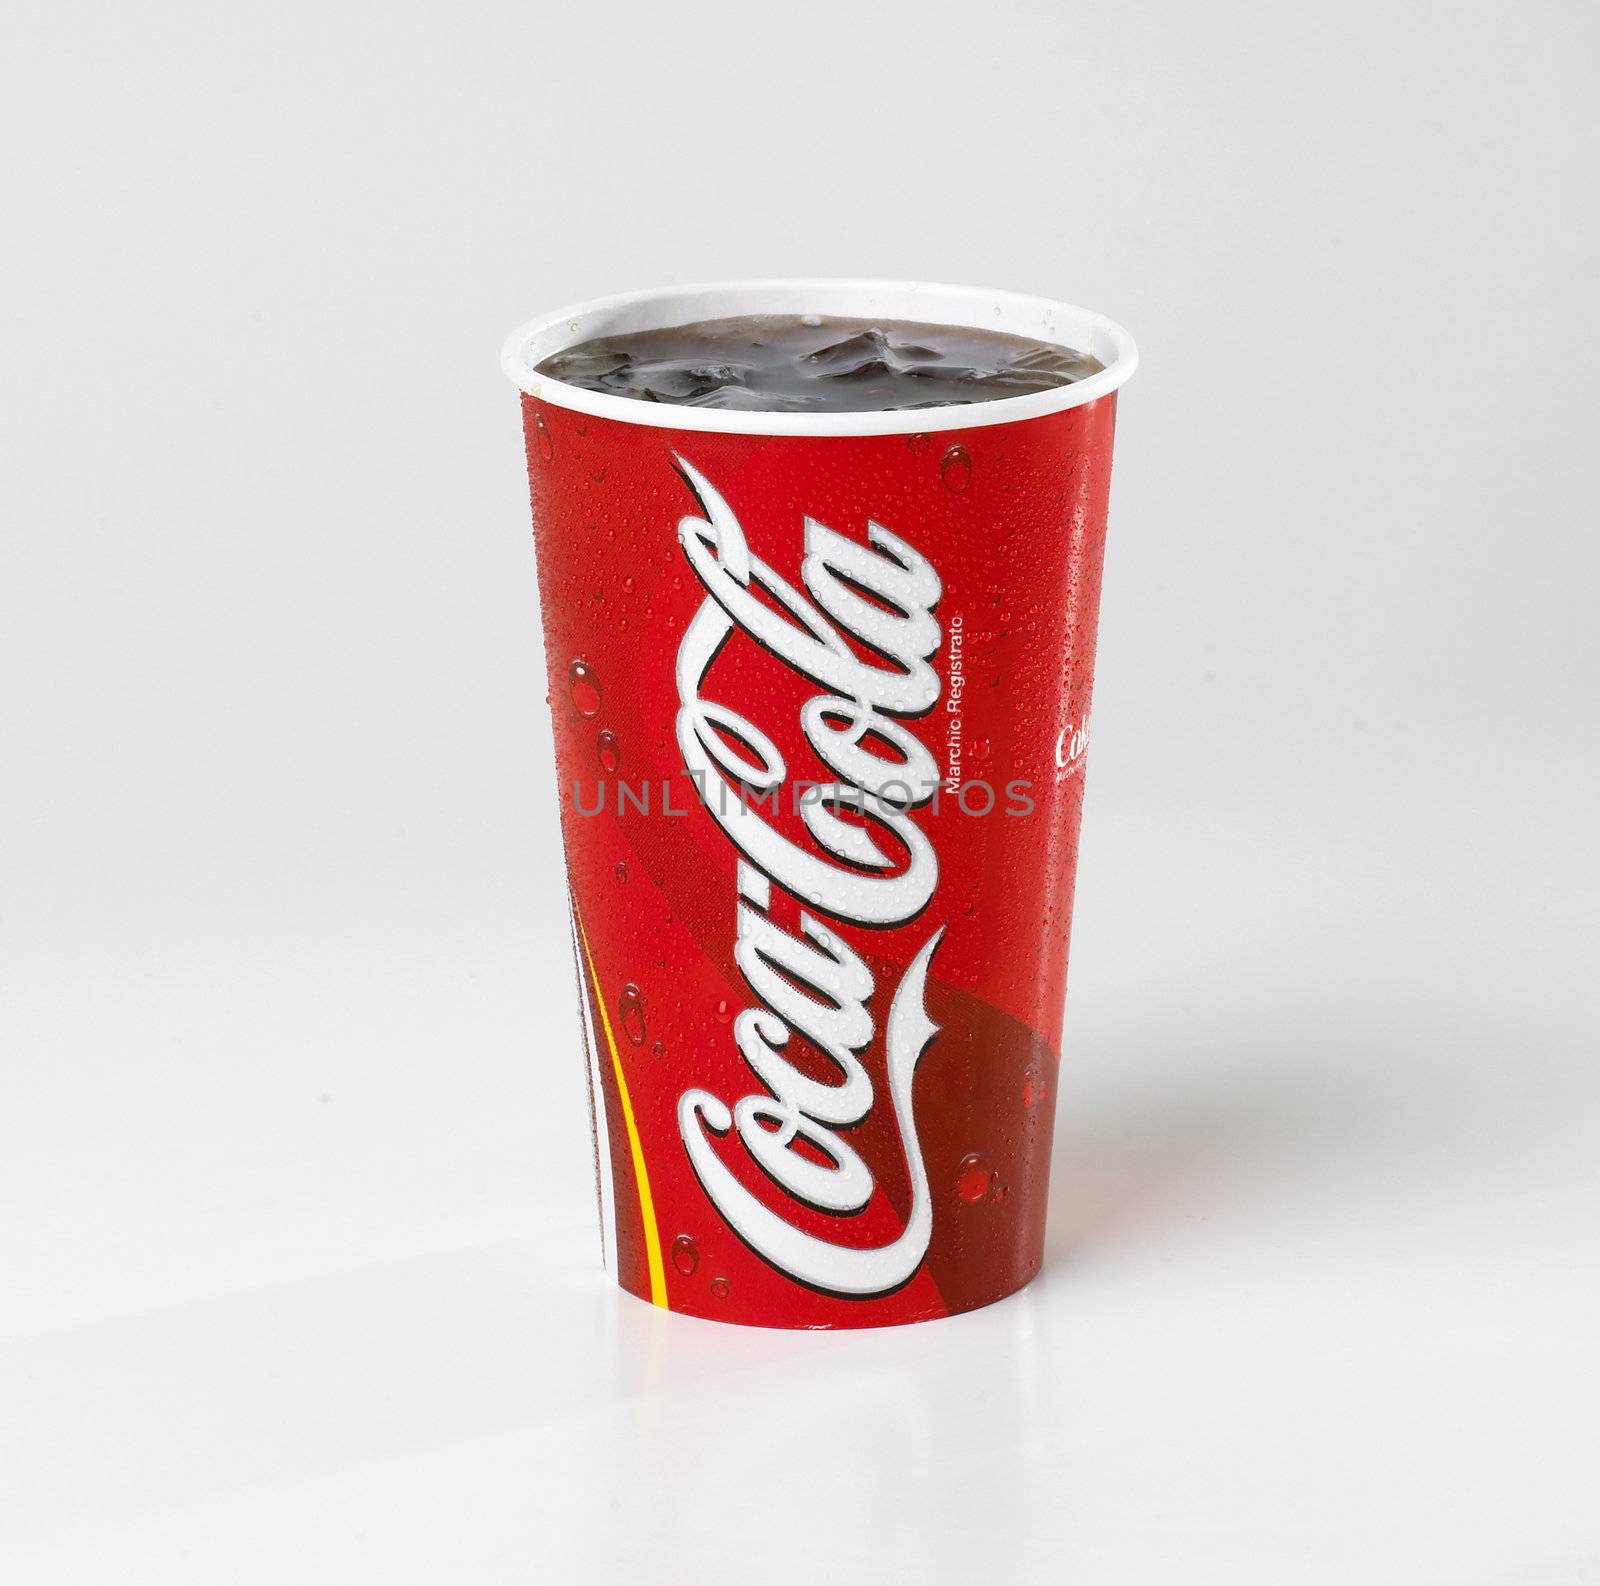 A Coca Cola  cup isolated on a white background with condensation on the cup.